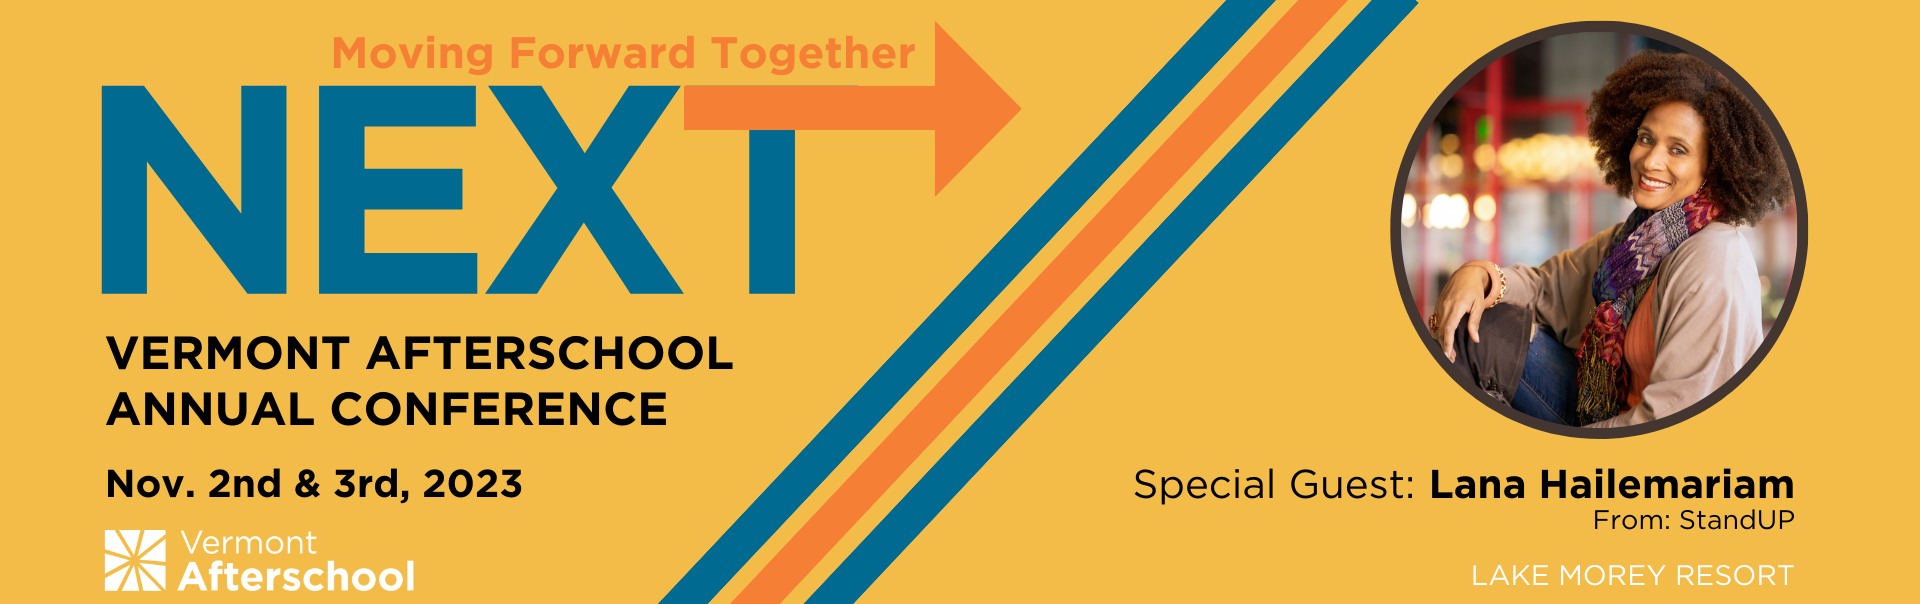 Moving Forward Together: Next! Vermont Afterschool Conference, Nov. 2nd-3rd, 2023, Lake More Resort. Special Guest: Lana Hailemariam from StandUP.